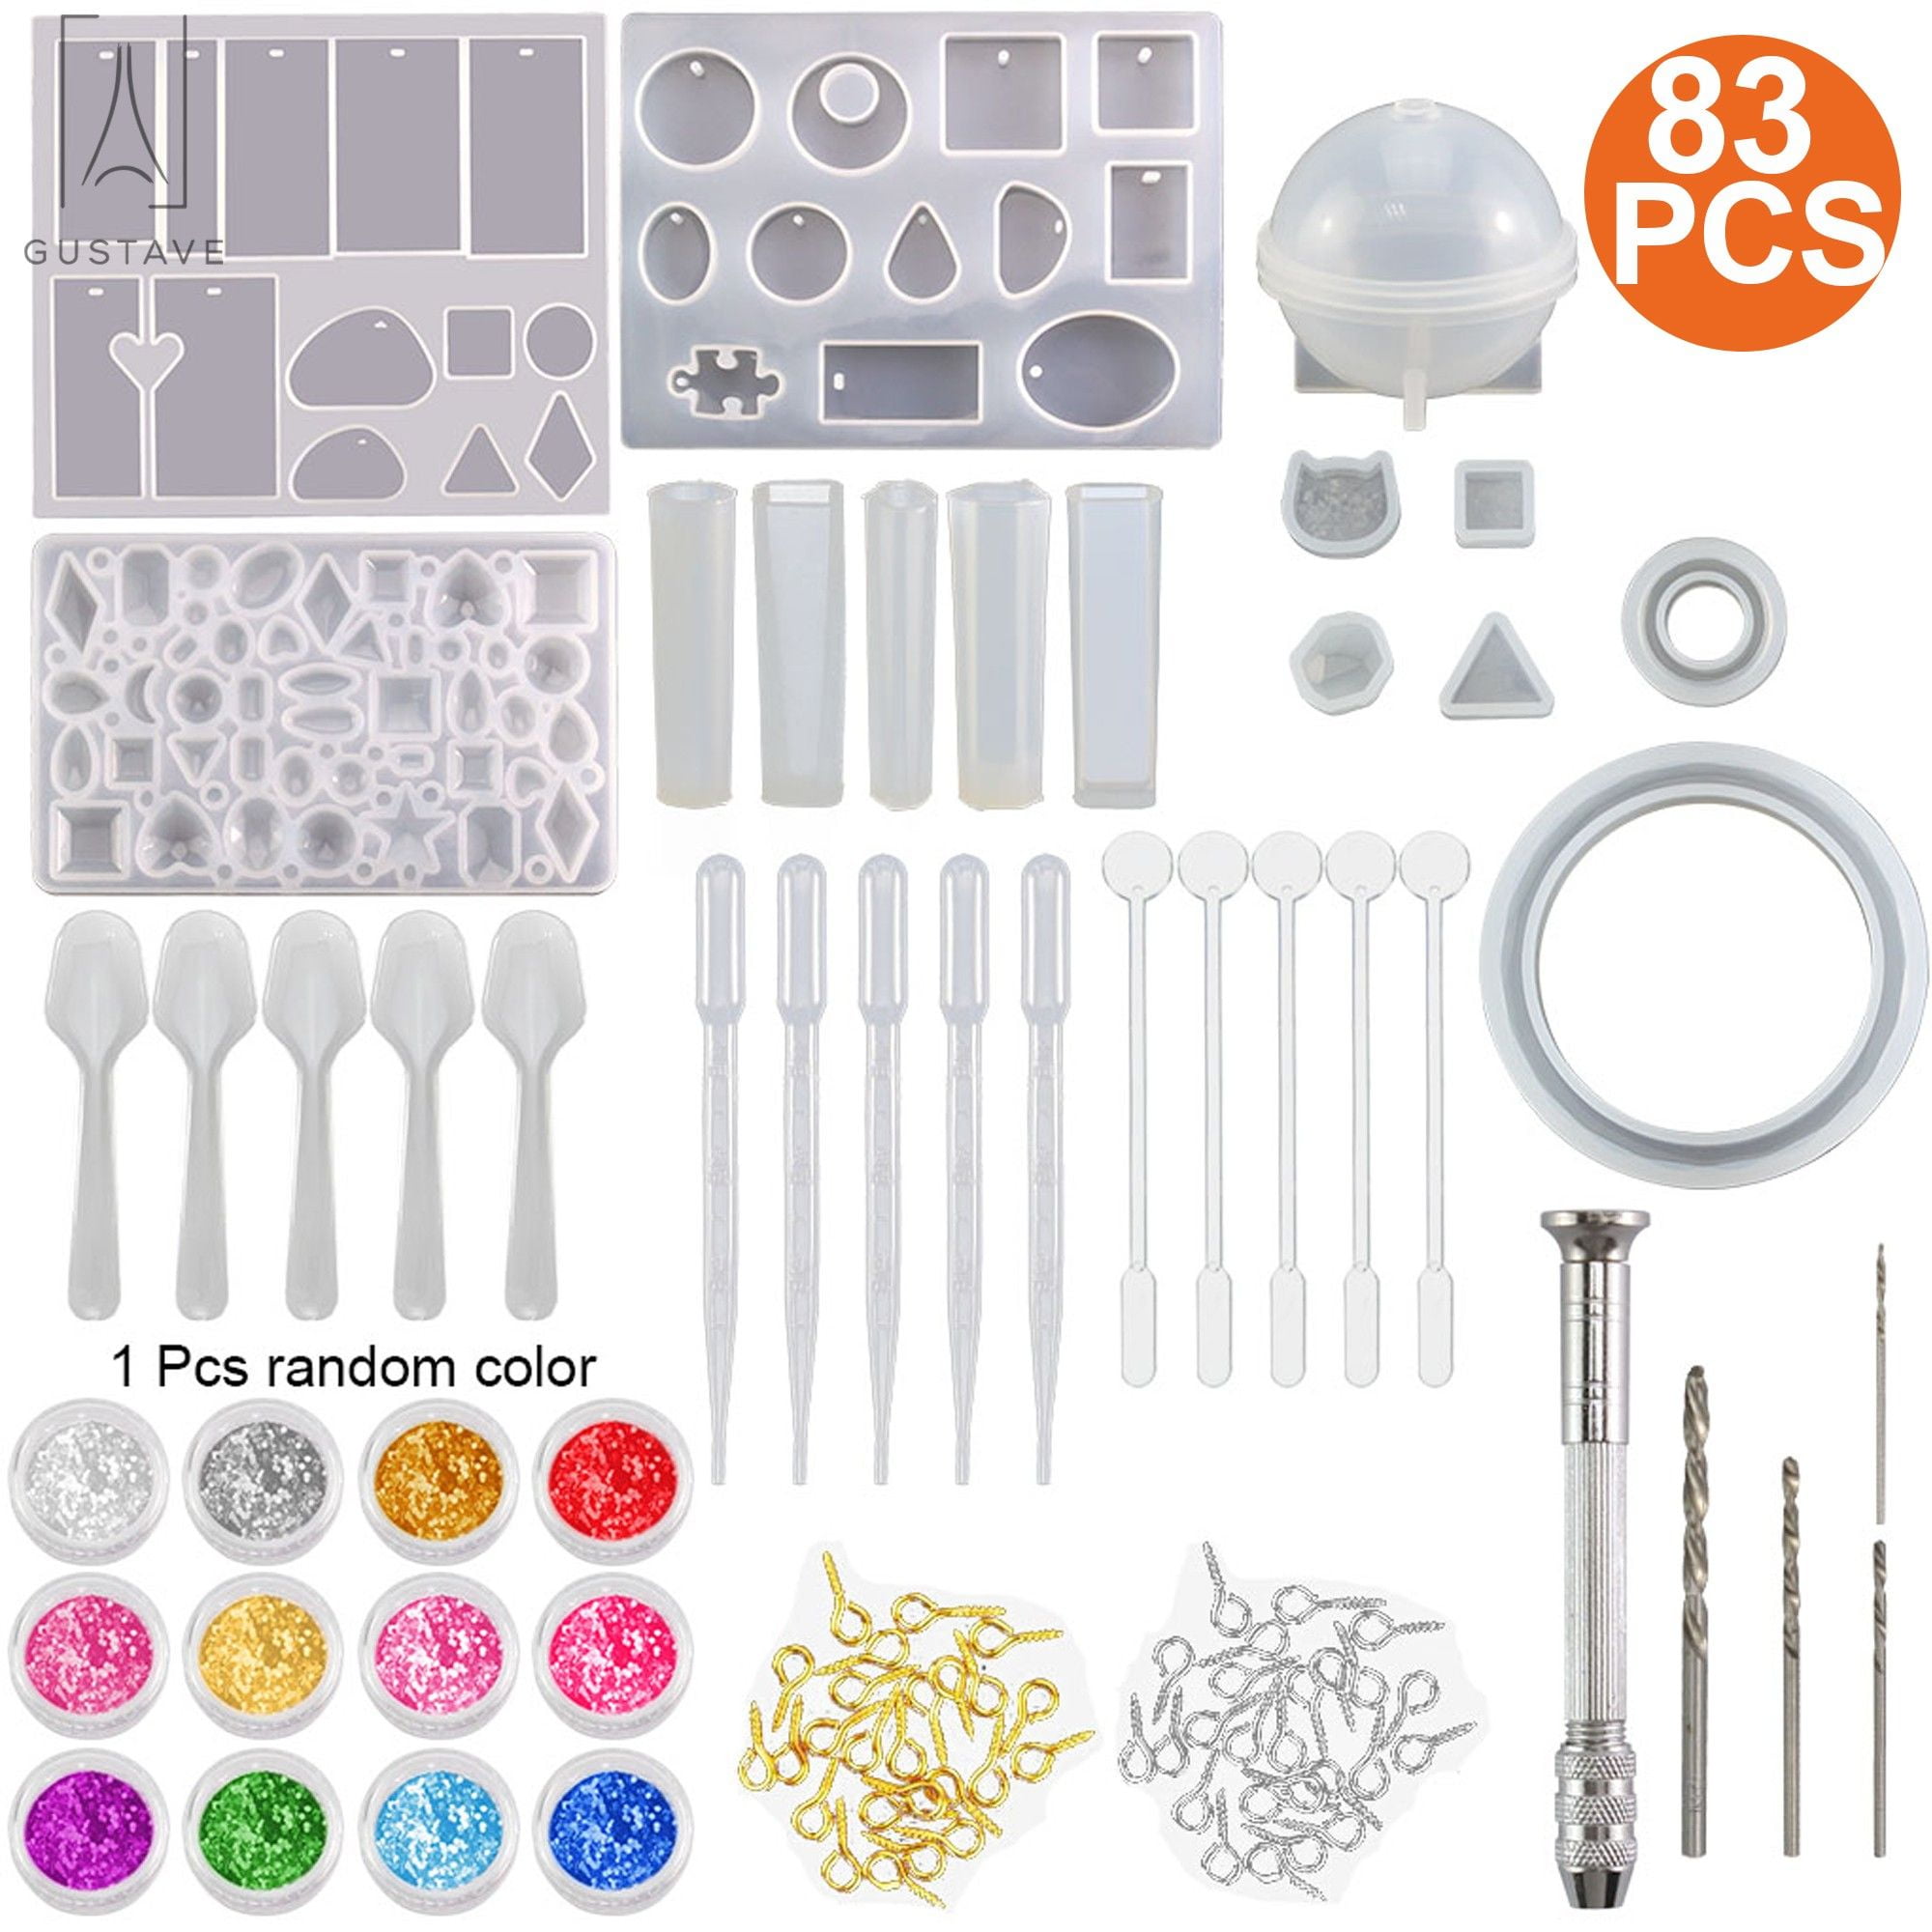 Tarmeek Hand Casting Kit - Craft Supplies for Plaster Mold w